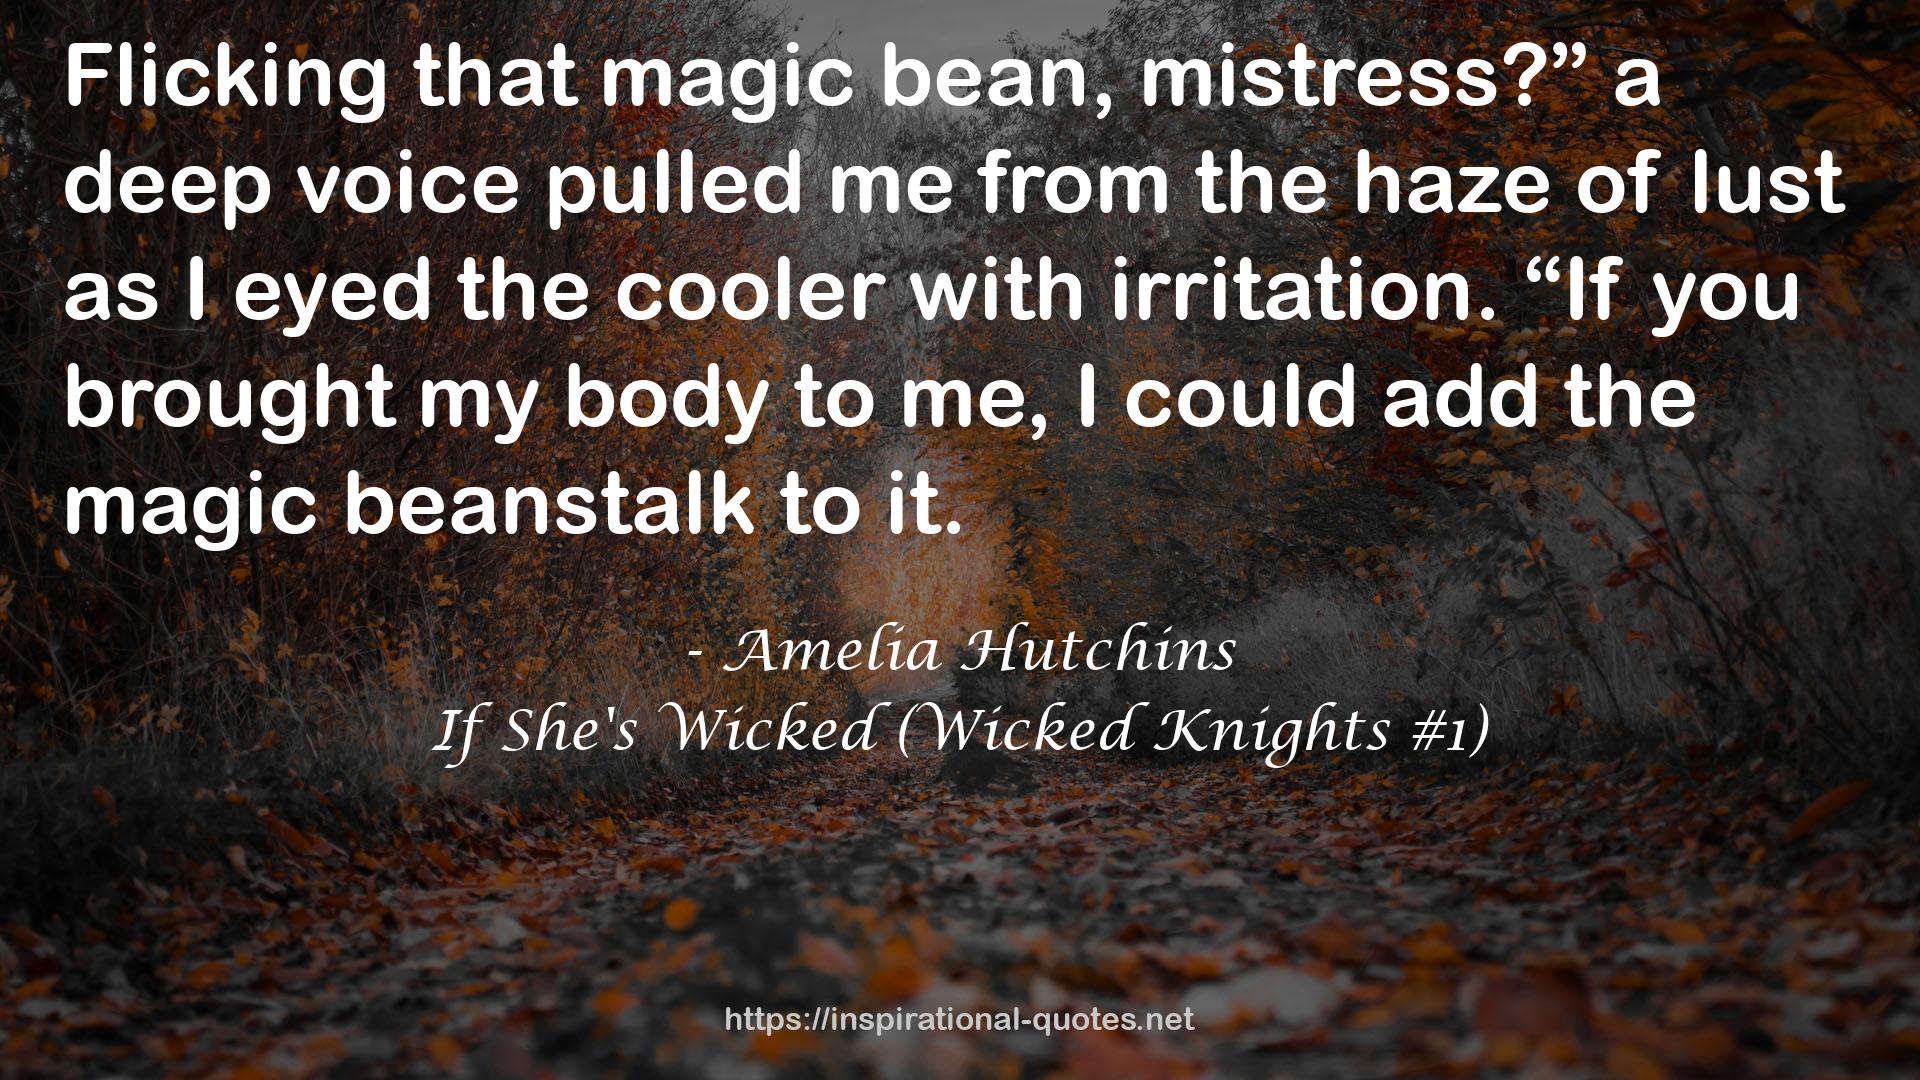 If She's Wicked (Wicked Knights #1) QUOTES